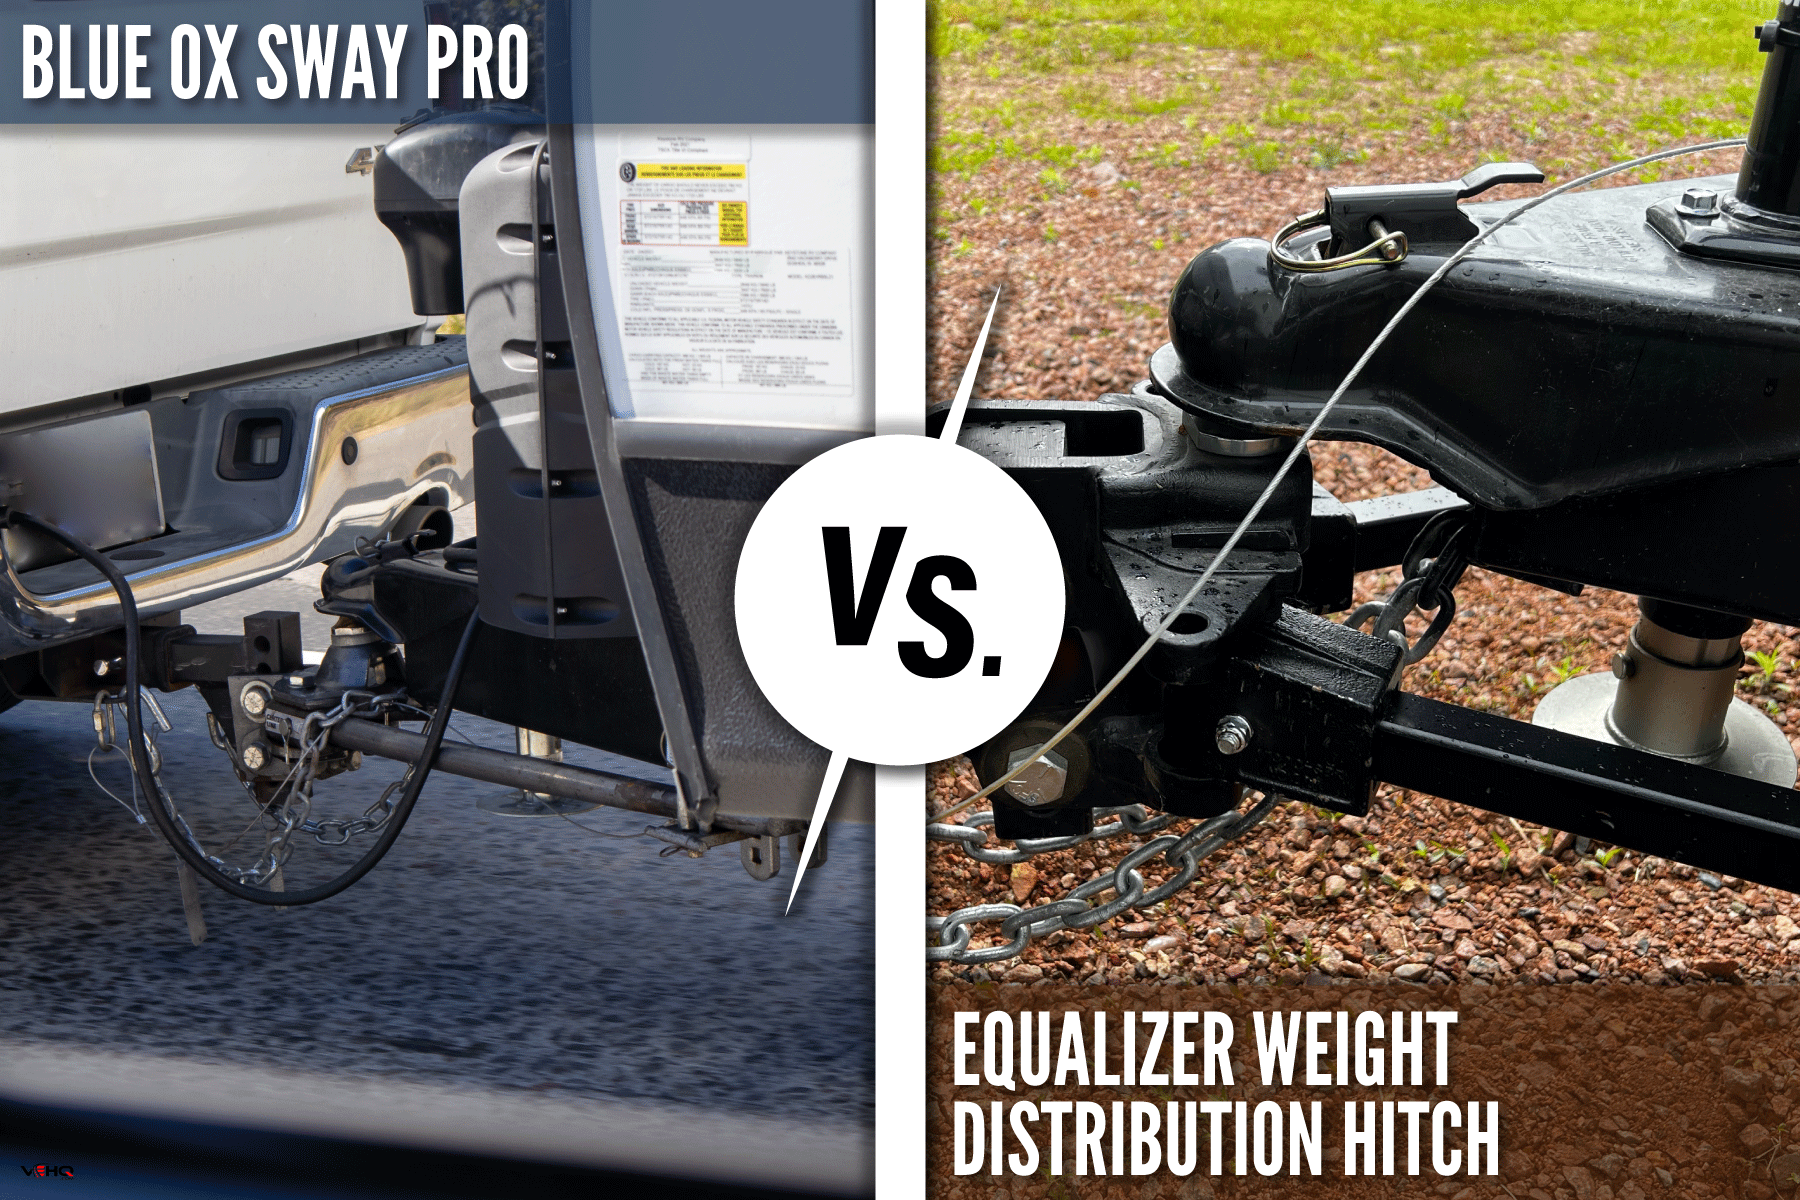 collab photo of a Blue Ox Sway Pro and Equalizer Weight Distribution Hitch comparison, Blue Ox Sway Pro Vs Equalizer Weight Distribution Hitch: Which Is Best?